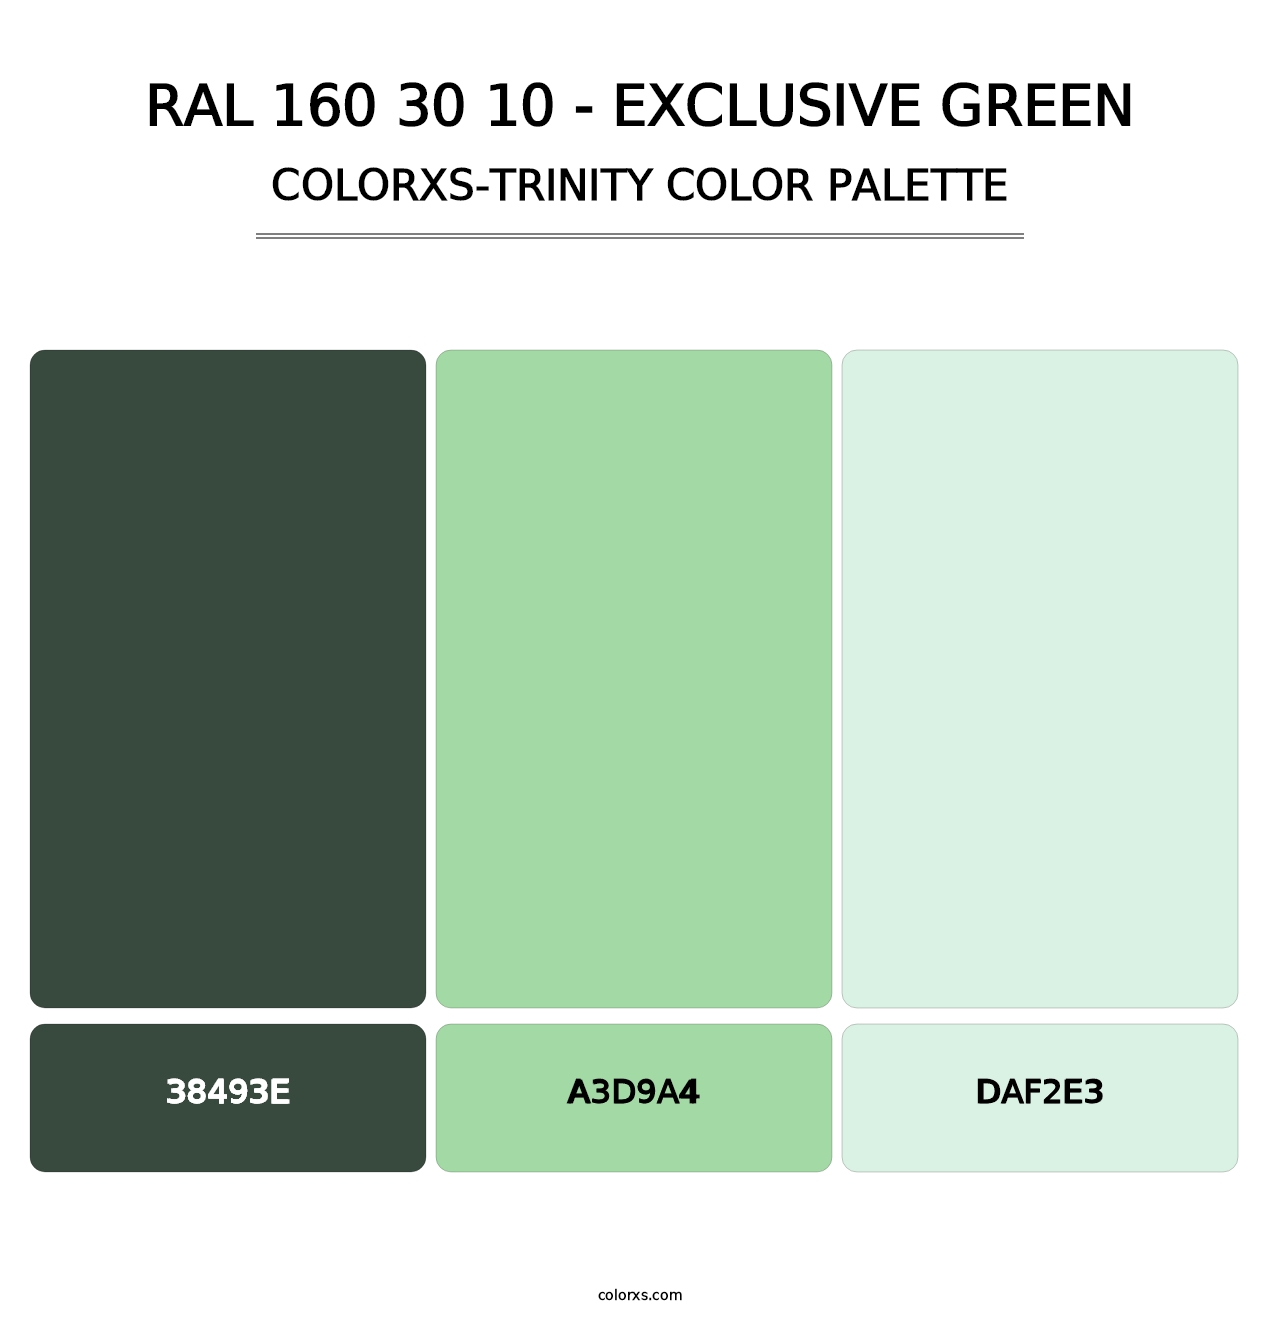 RAL 160 30 10 - Exclusive Green - Colorxs Trinity Palette